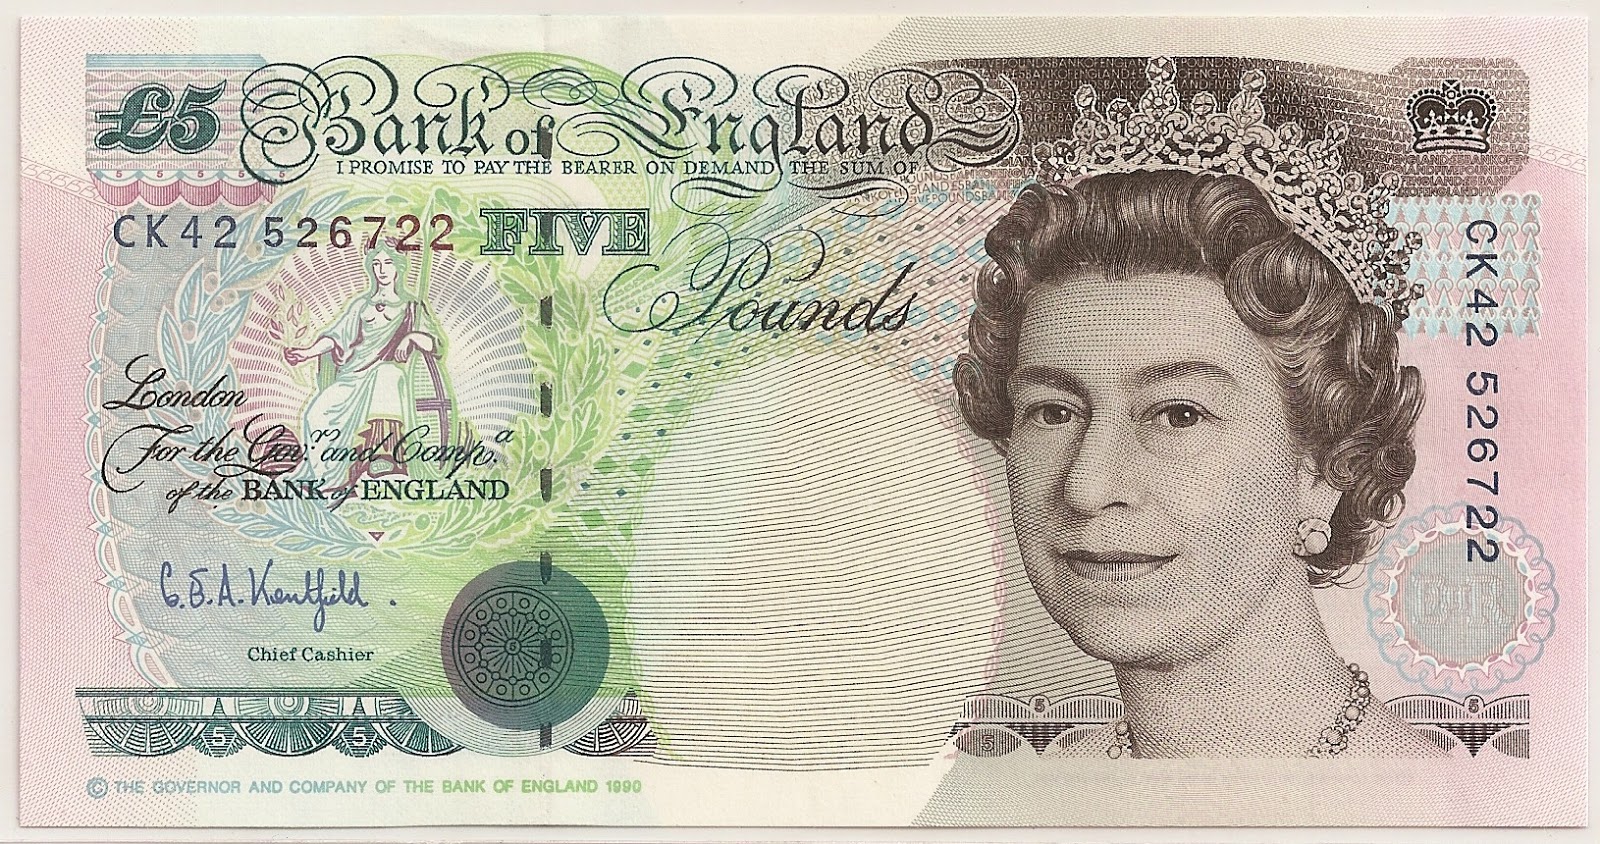 A Five Pound U.K. Banknote issued by the Bank of England in 1990 (since wit...